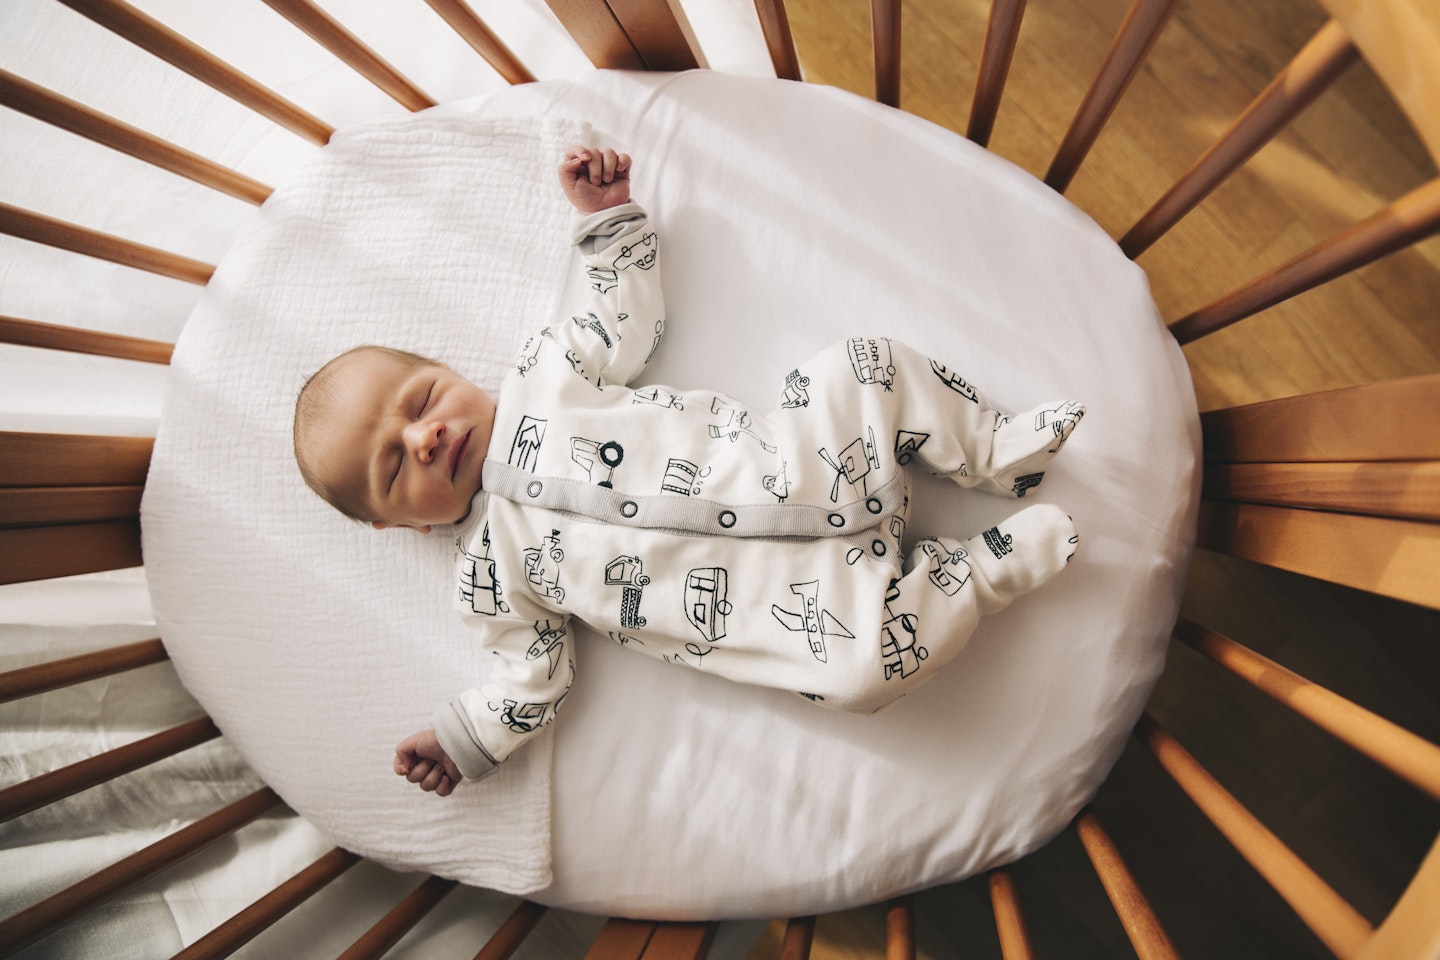 What should my baby wear to bed?